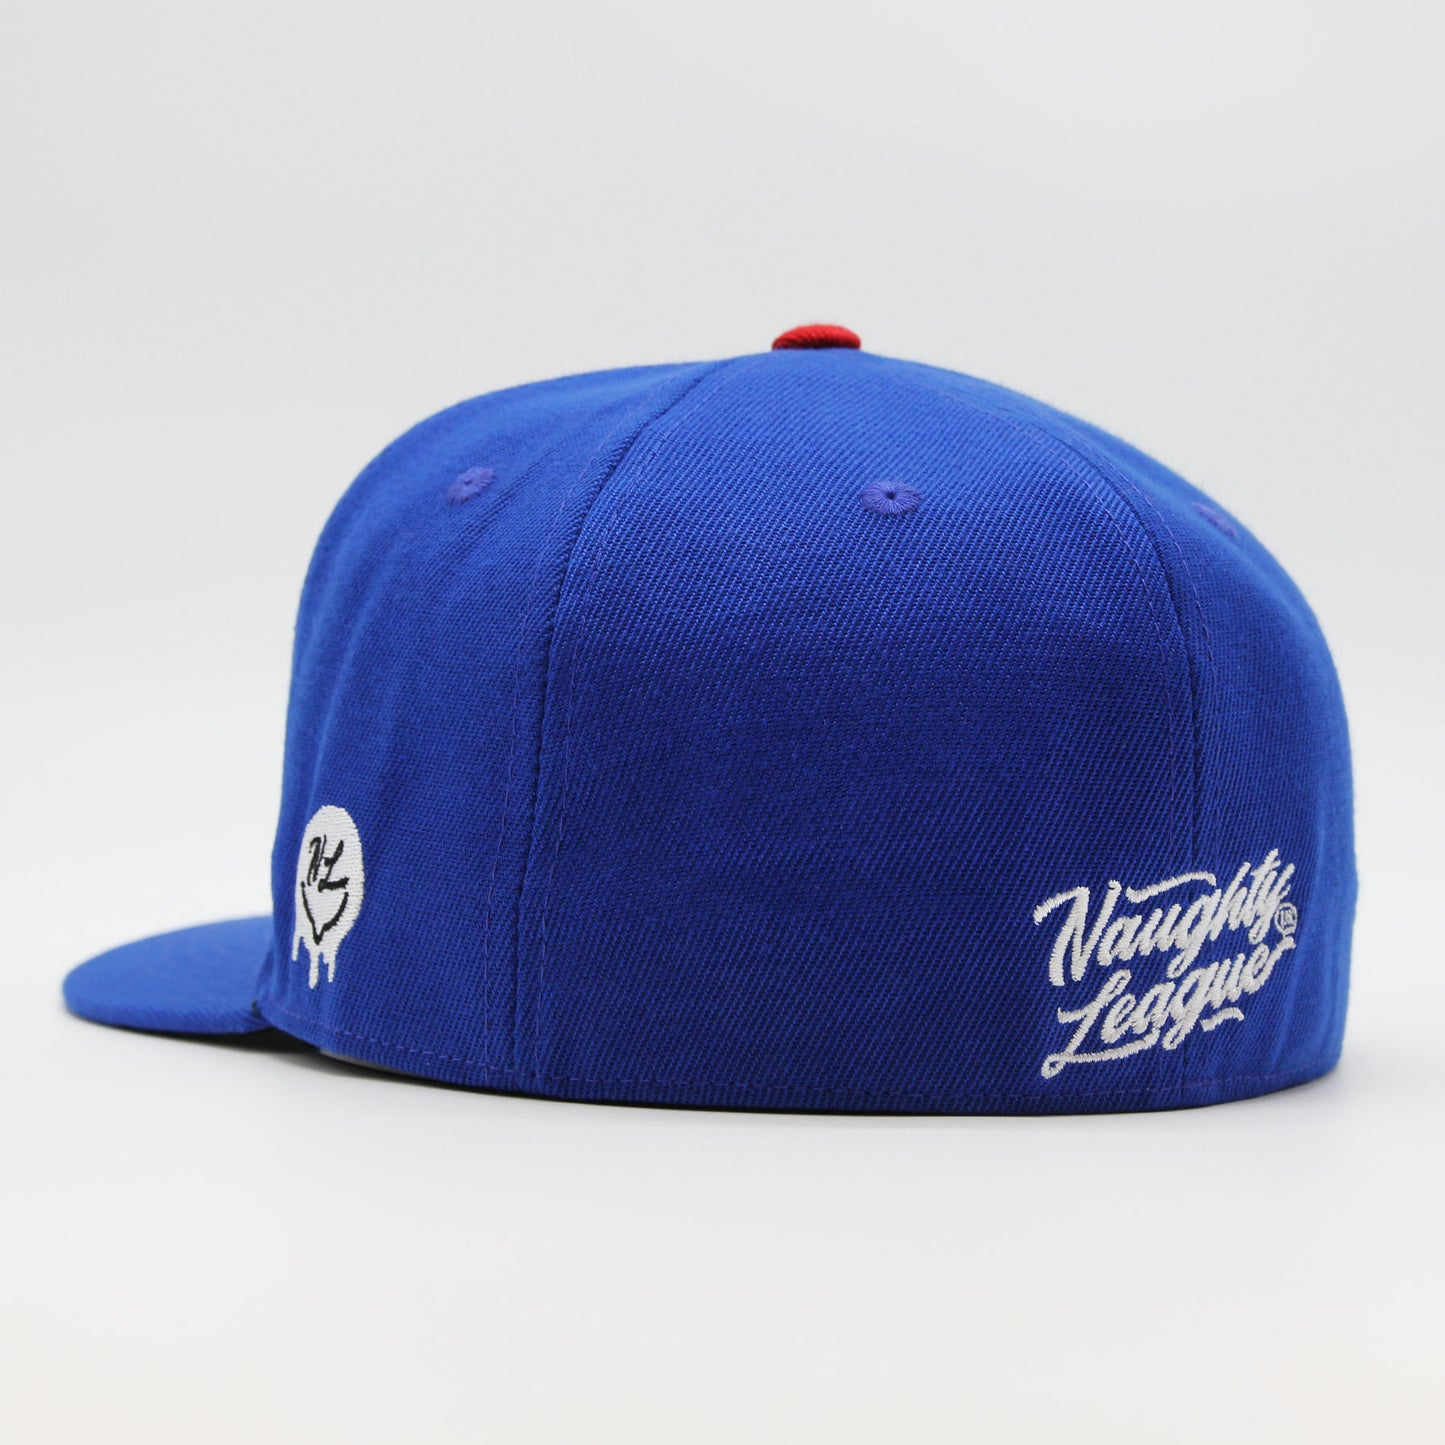 Naughty League South Central Original Gangsters fitted royal/red